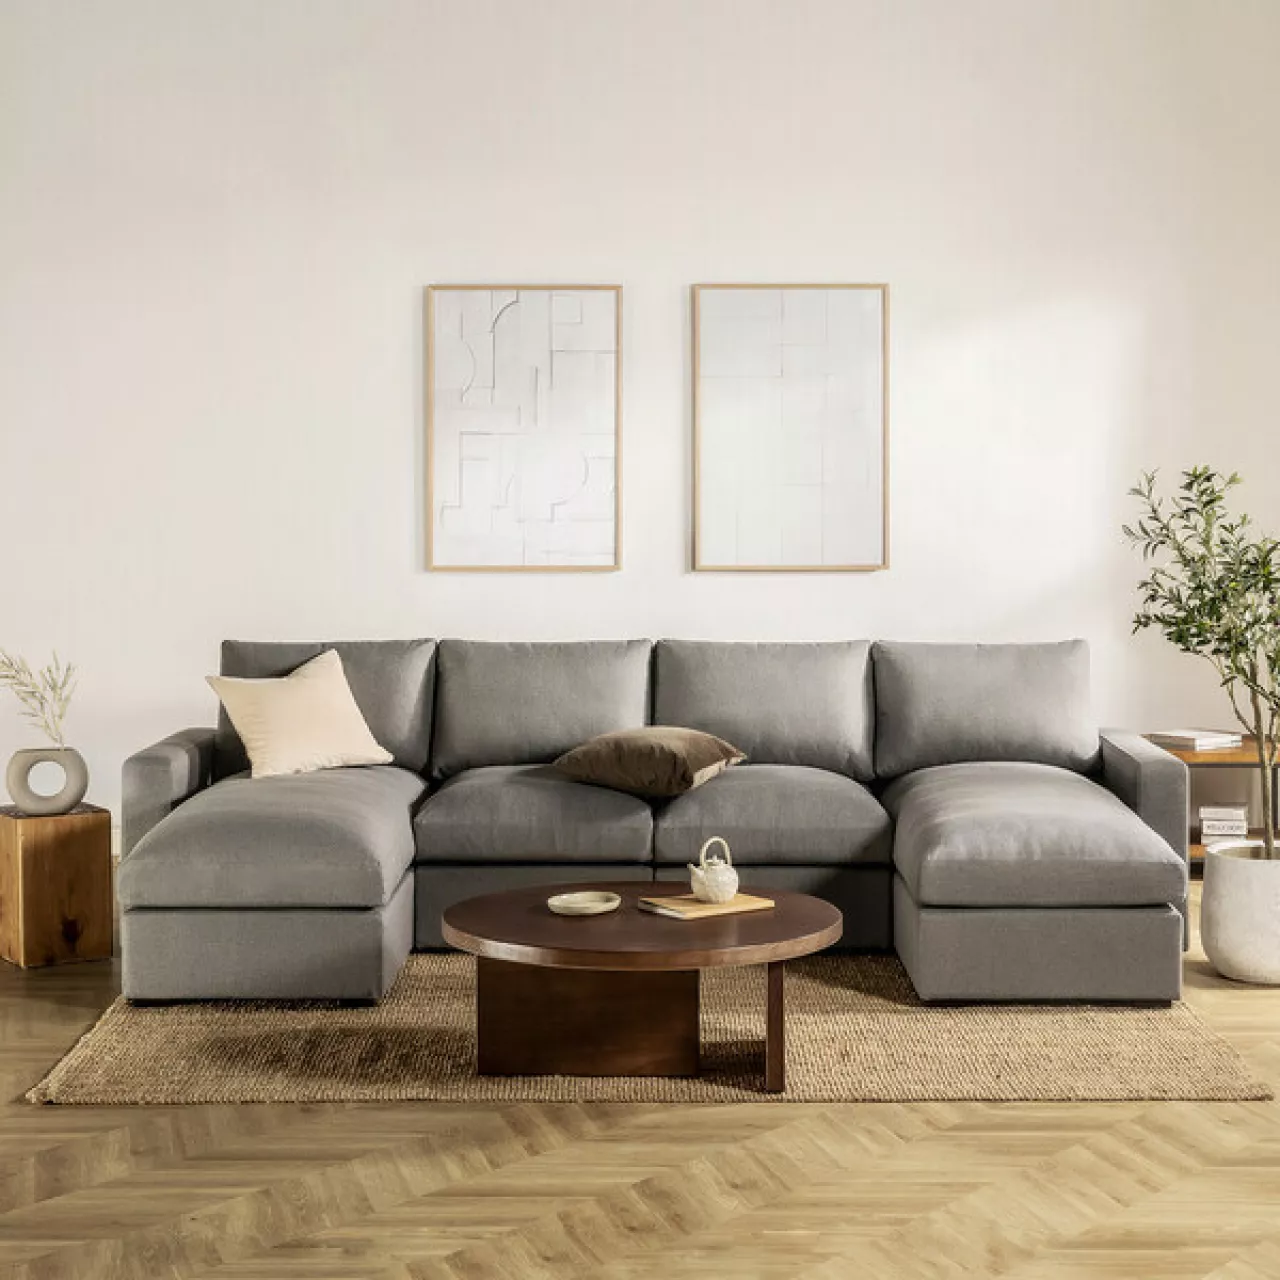 Zinus is announcing a new line of living room essentials, made with design and comfort in mind for easy hosting and even better lounging. img#1